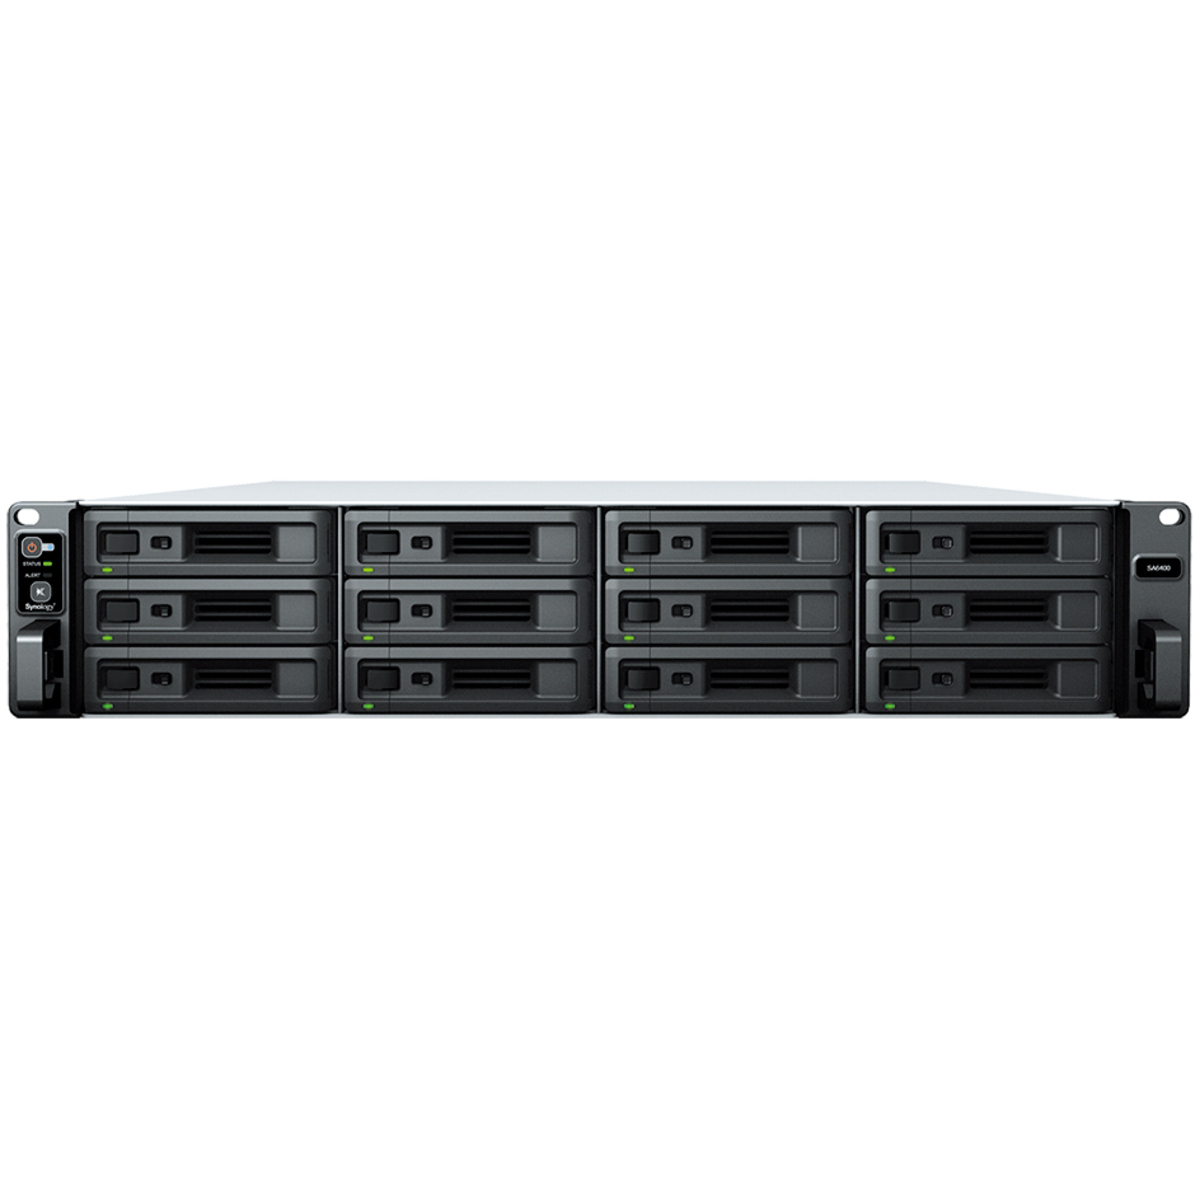 Synology RackStation SA6400 192tb 12-Bay RackMount Large Business / Enterprise NAS - Network Attached Storage Device 12x16tb Seagate IronWolf ST16000VN001 3.5 7200rpm SATA 6Gb/s HDD NAS Class Drives Installed - Burn-In Tested RackStation SA6400